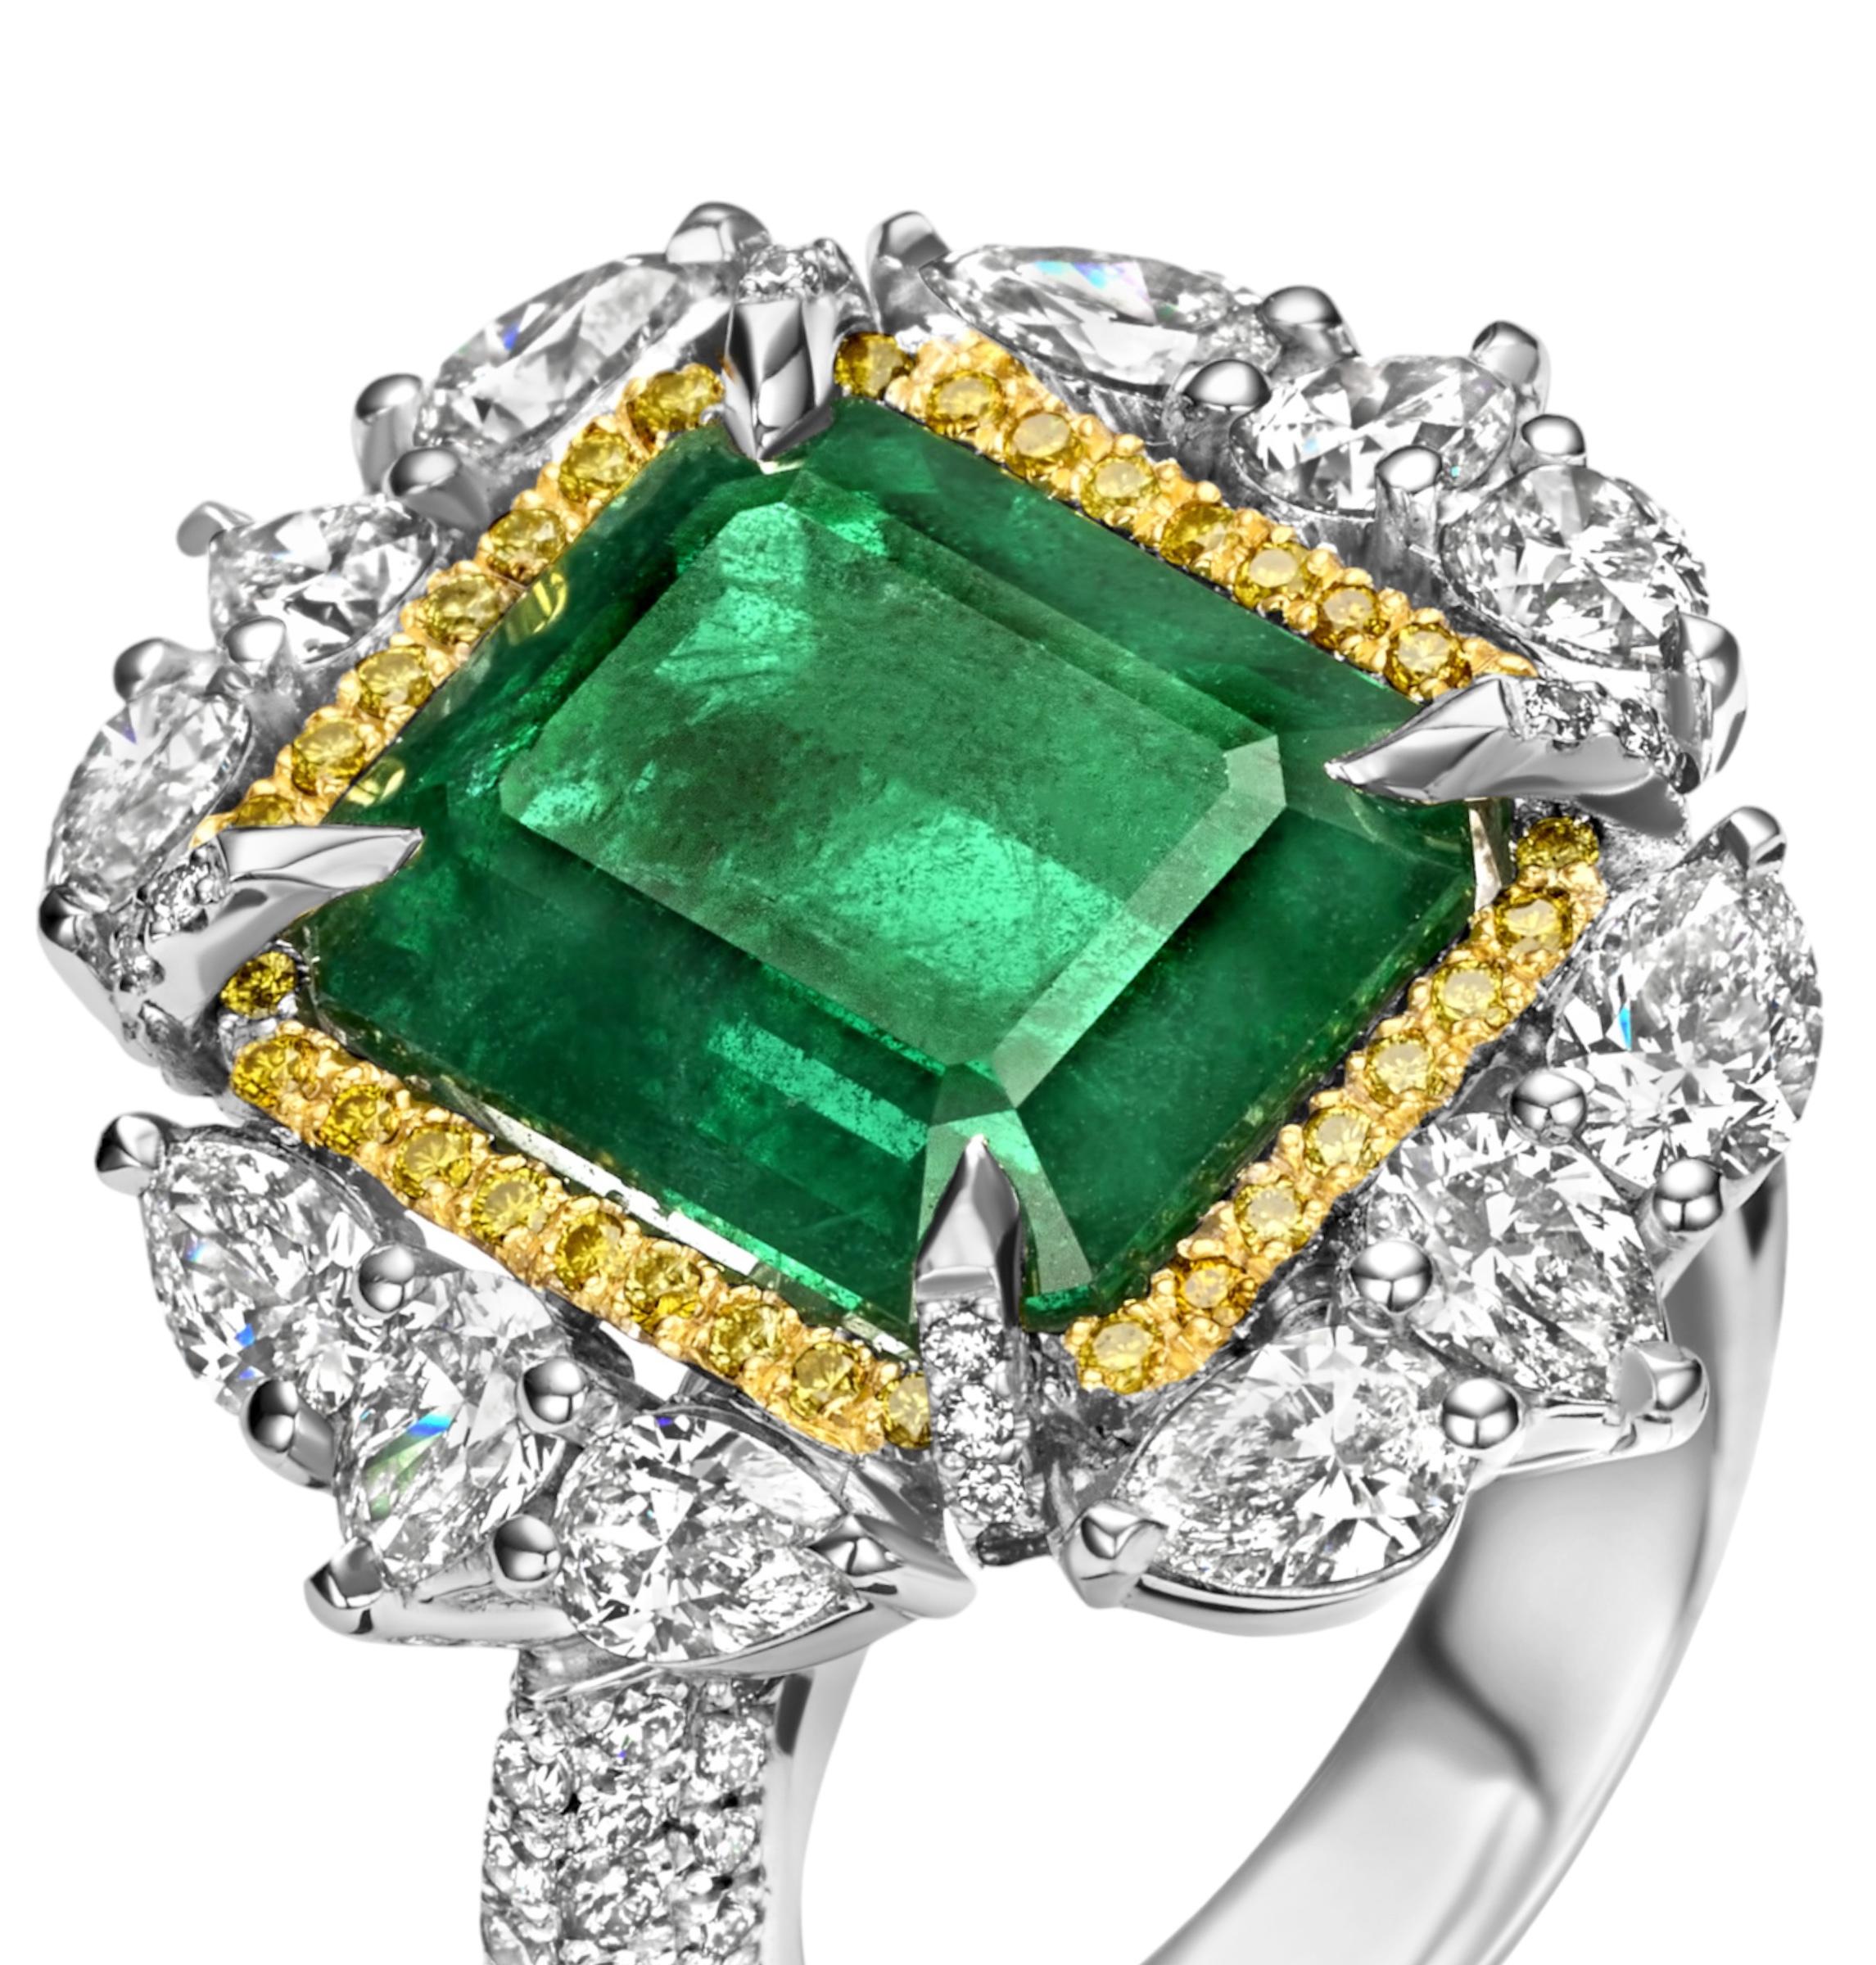 18 kt. White Gold Ring with 12.27 ct. Emerald, Pear shape diamonds 2.62 ct.

Completely handcrafted in our atelier,beatiful Emerald and Diamonds. 

Emerald: 12.27 ct.

Pear shape diamonds 2,62 ct.

Fancy Yellow diamonds together 0,29 ct.

Brilliant